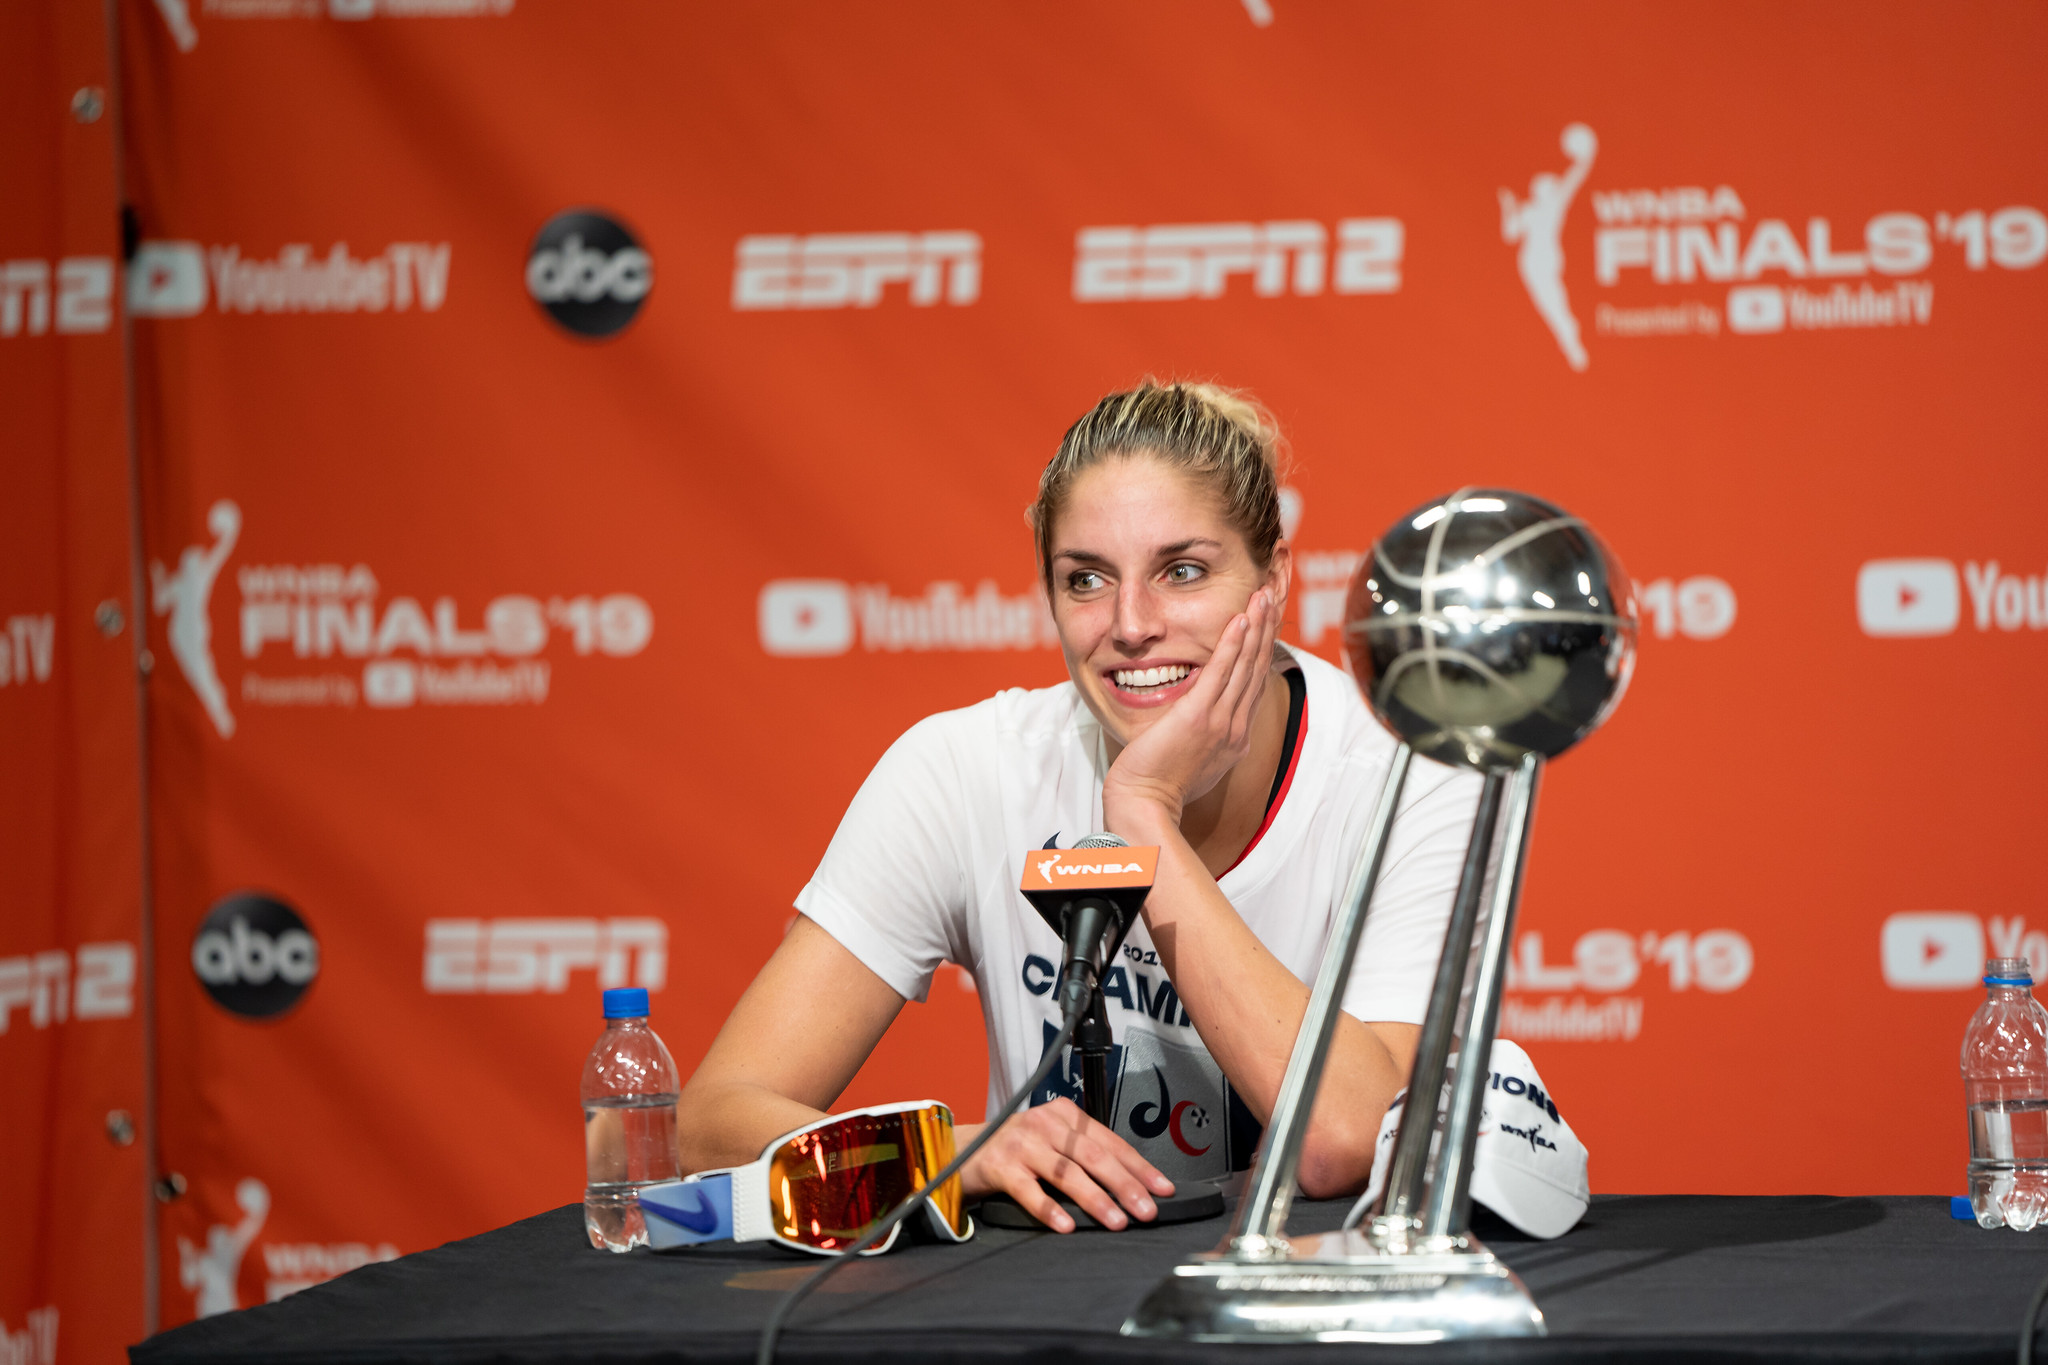 Top 5 Moments from Game 5 of 2019 WNBA Finals